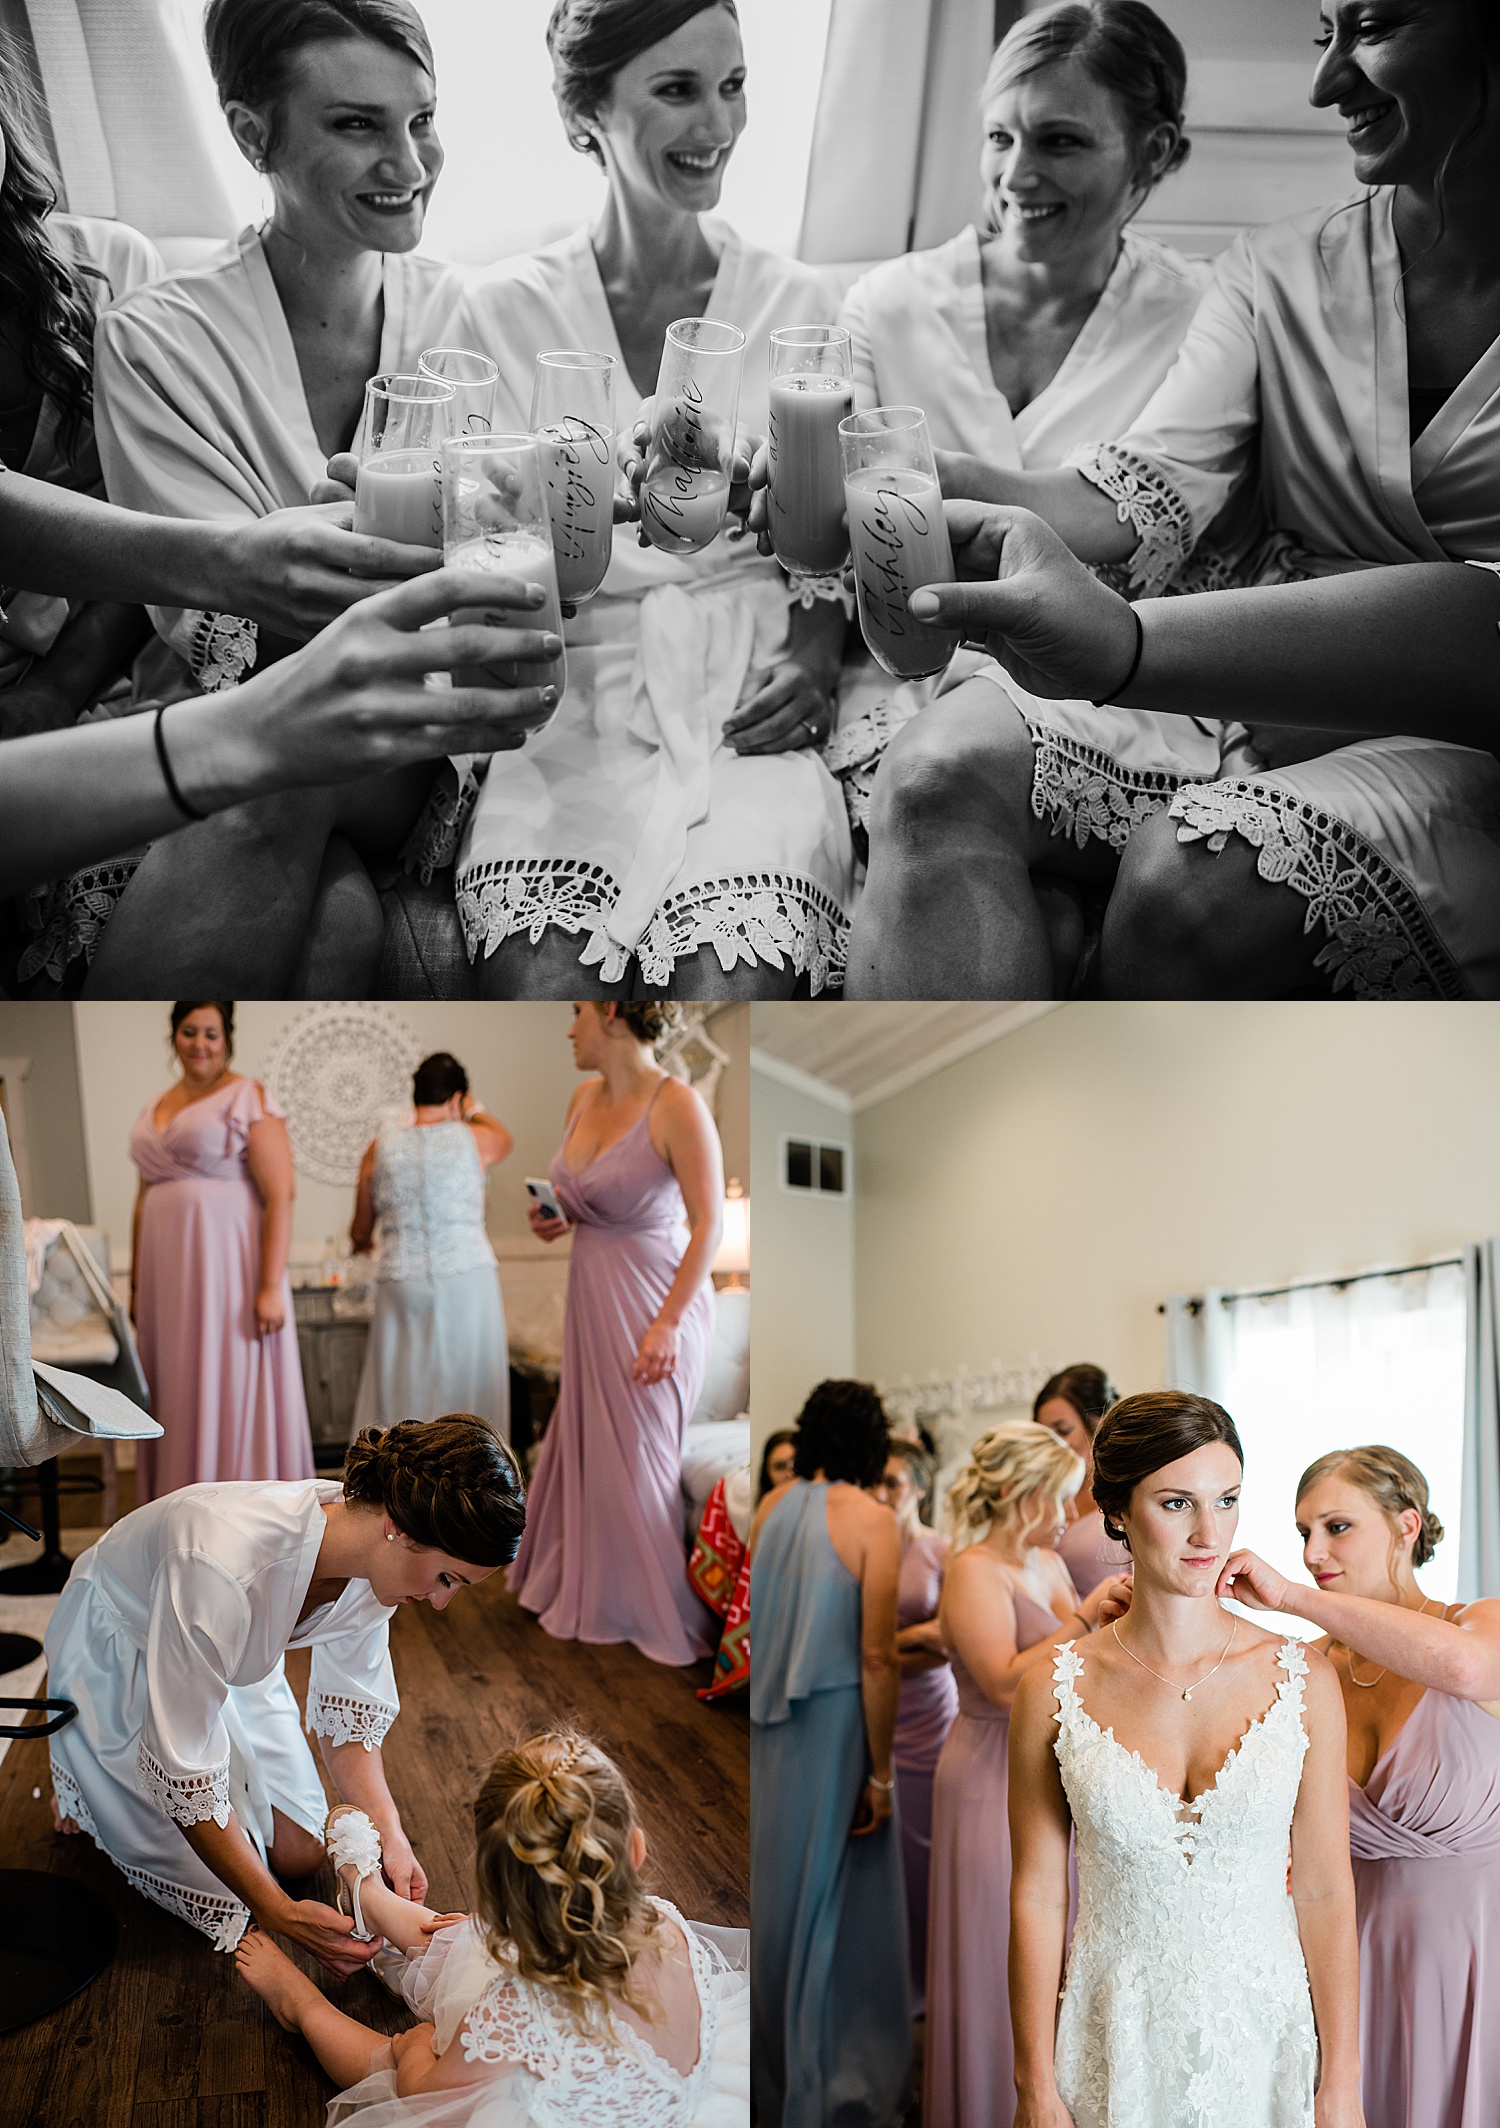 Bride and bridesmaids clinking champagne glasses and blush dresses at creekside wedding event barn